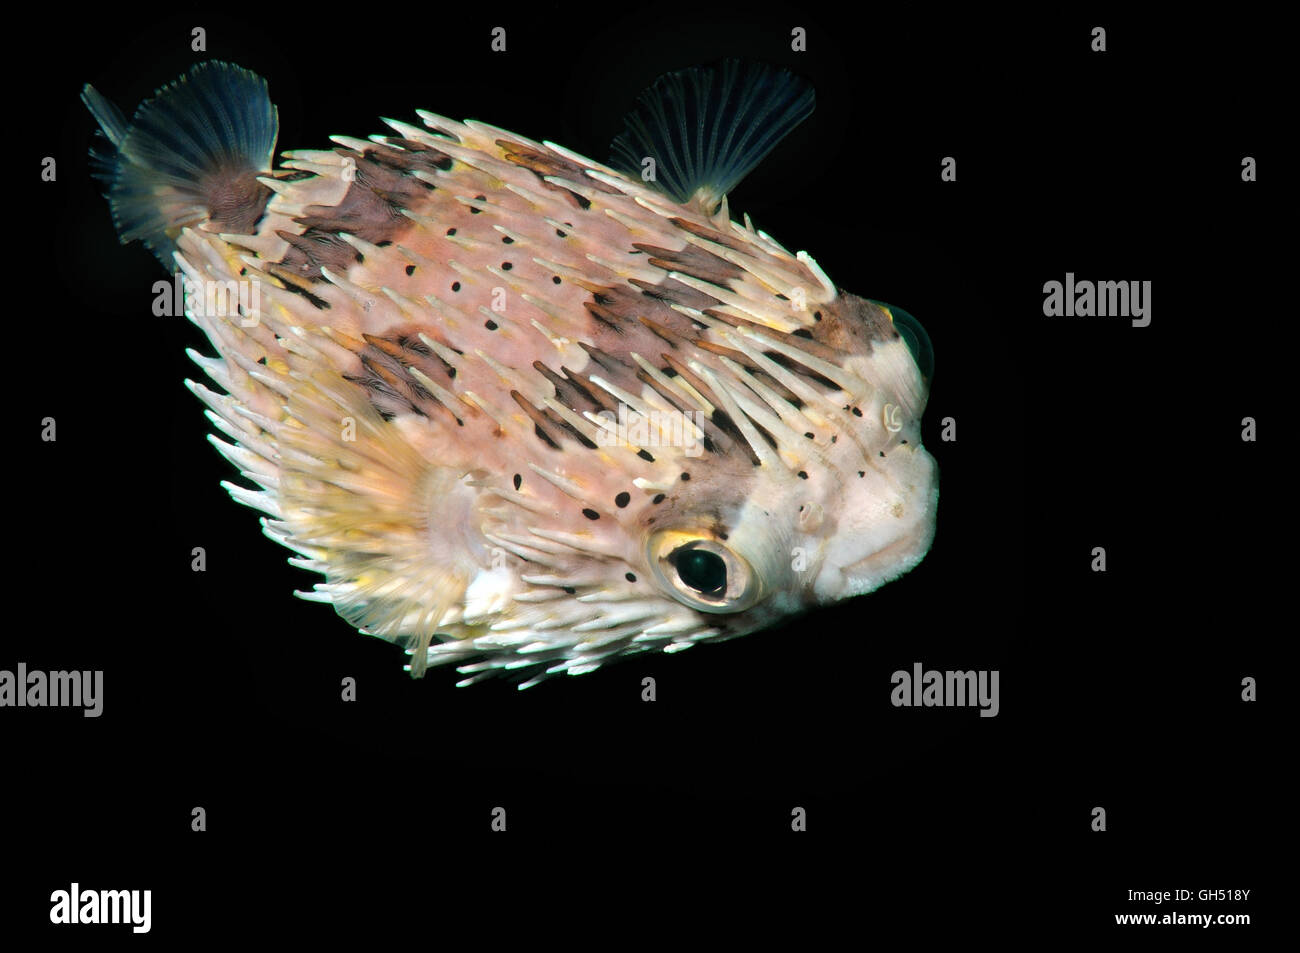 Long-spine porcupinefish, Longspined porcupinefish or Freckled porcupinefish (Diodon holocanthus) Indo-Pacific, Philippines Stock Photo